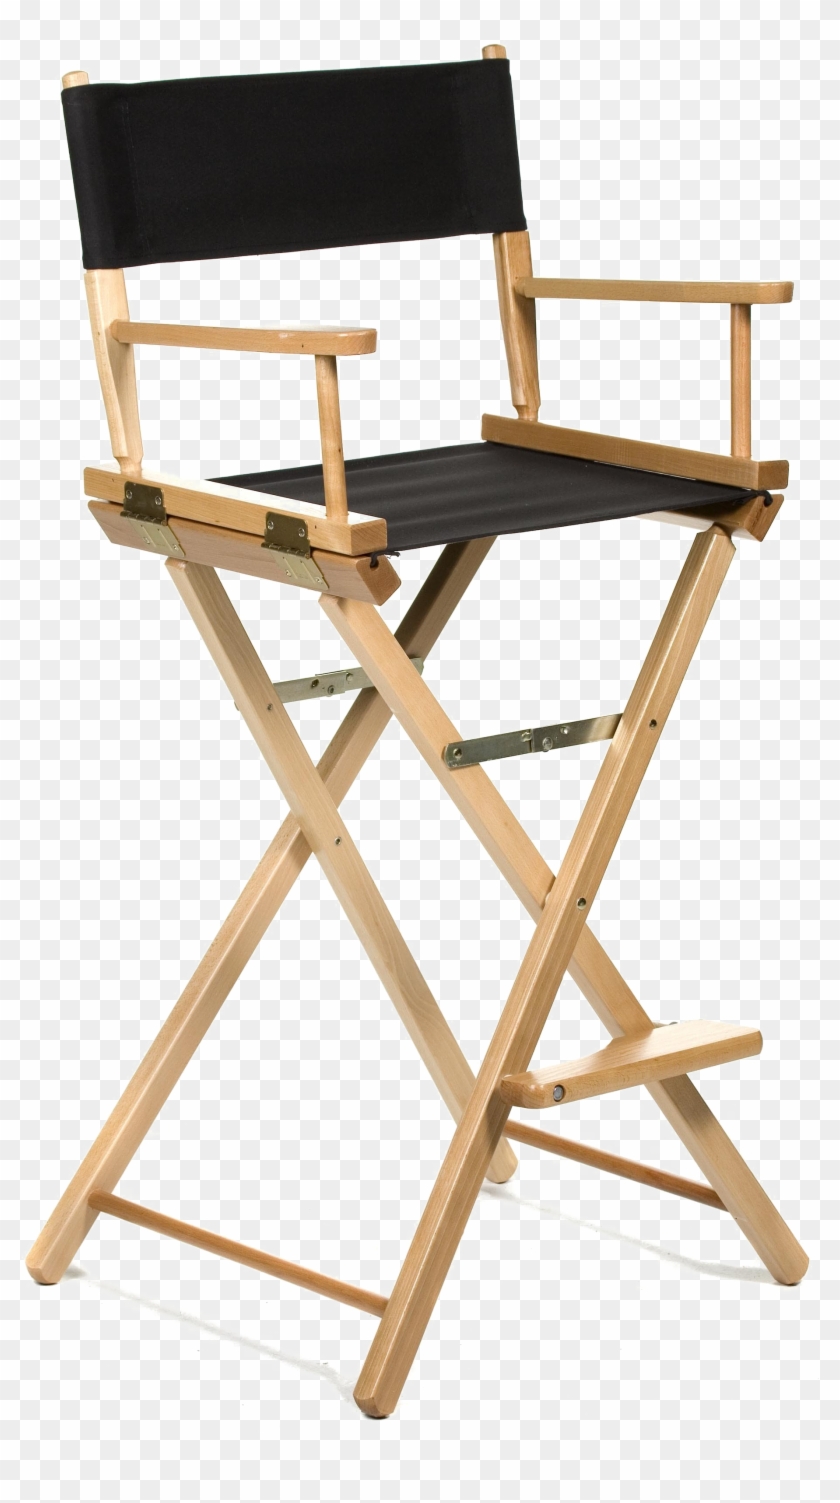 Director's Chair Png Hd - Directors Chair Clipart #2502820